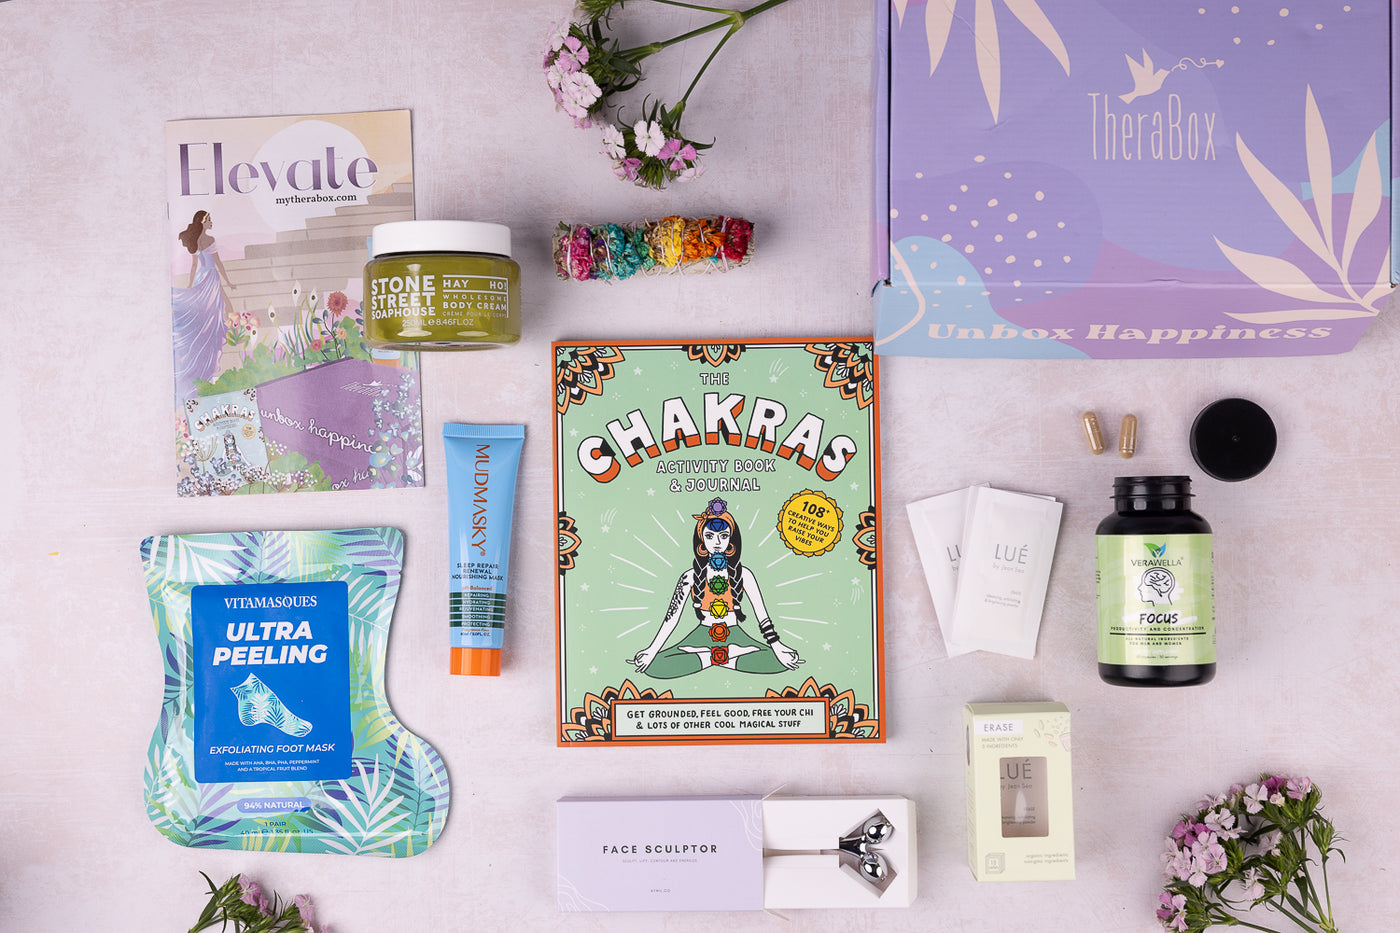 Therabox Elevate box featuring 8 self care items ranging from bath and body to skincare items